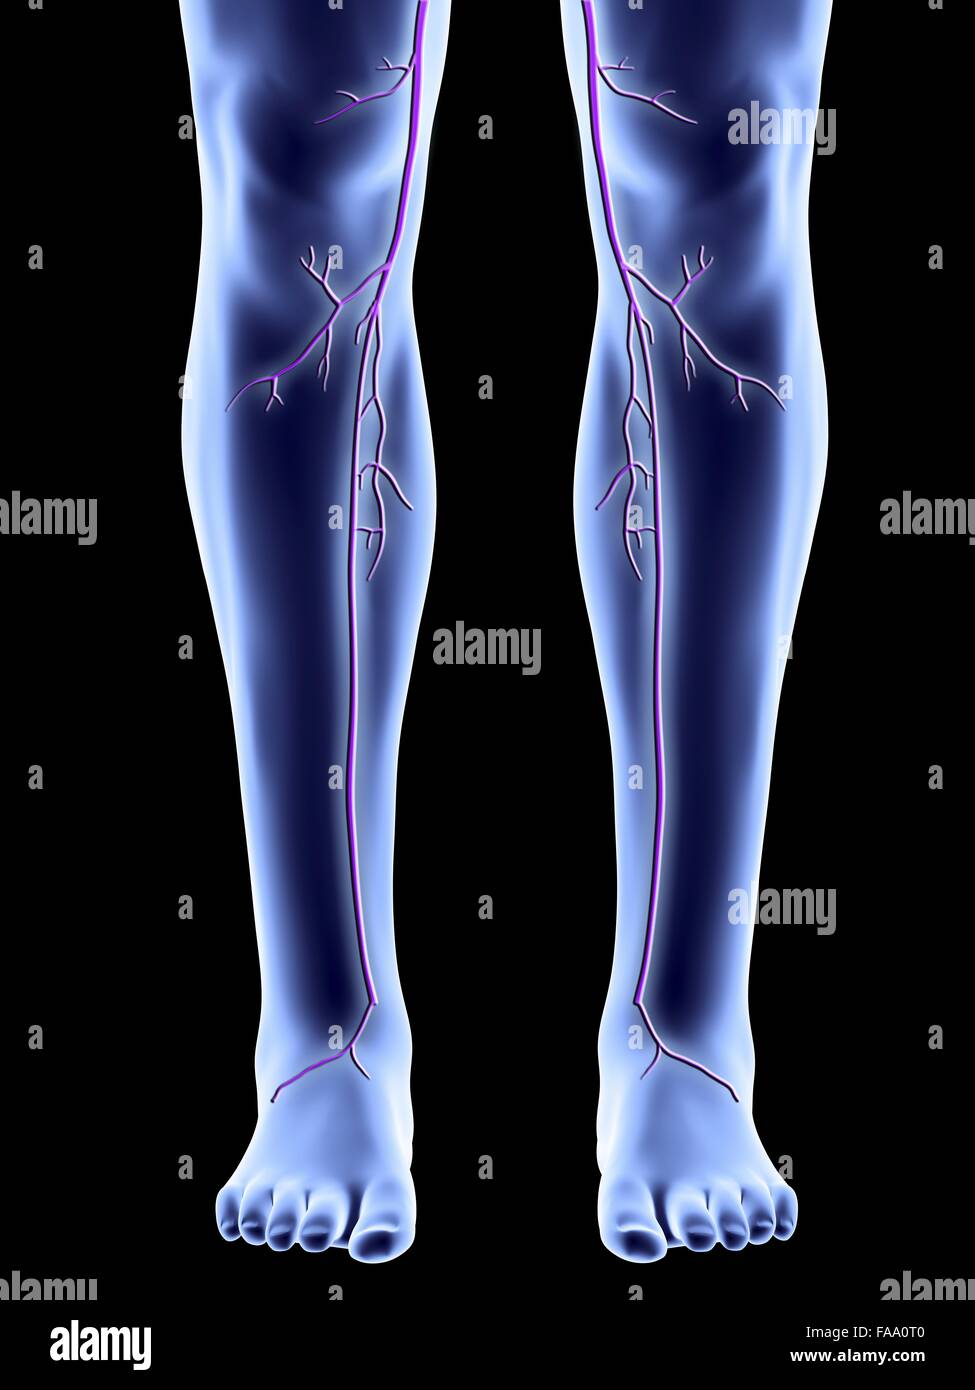 Computer artwork of legs showing the great saphenous vein. Stock Photo